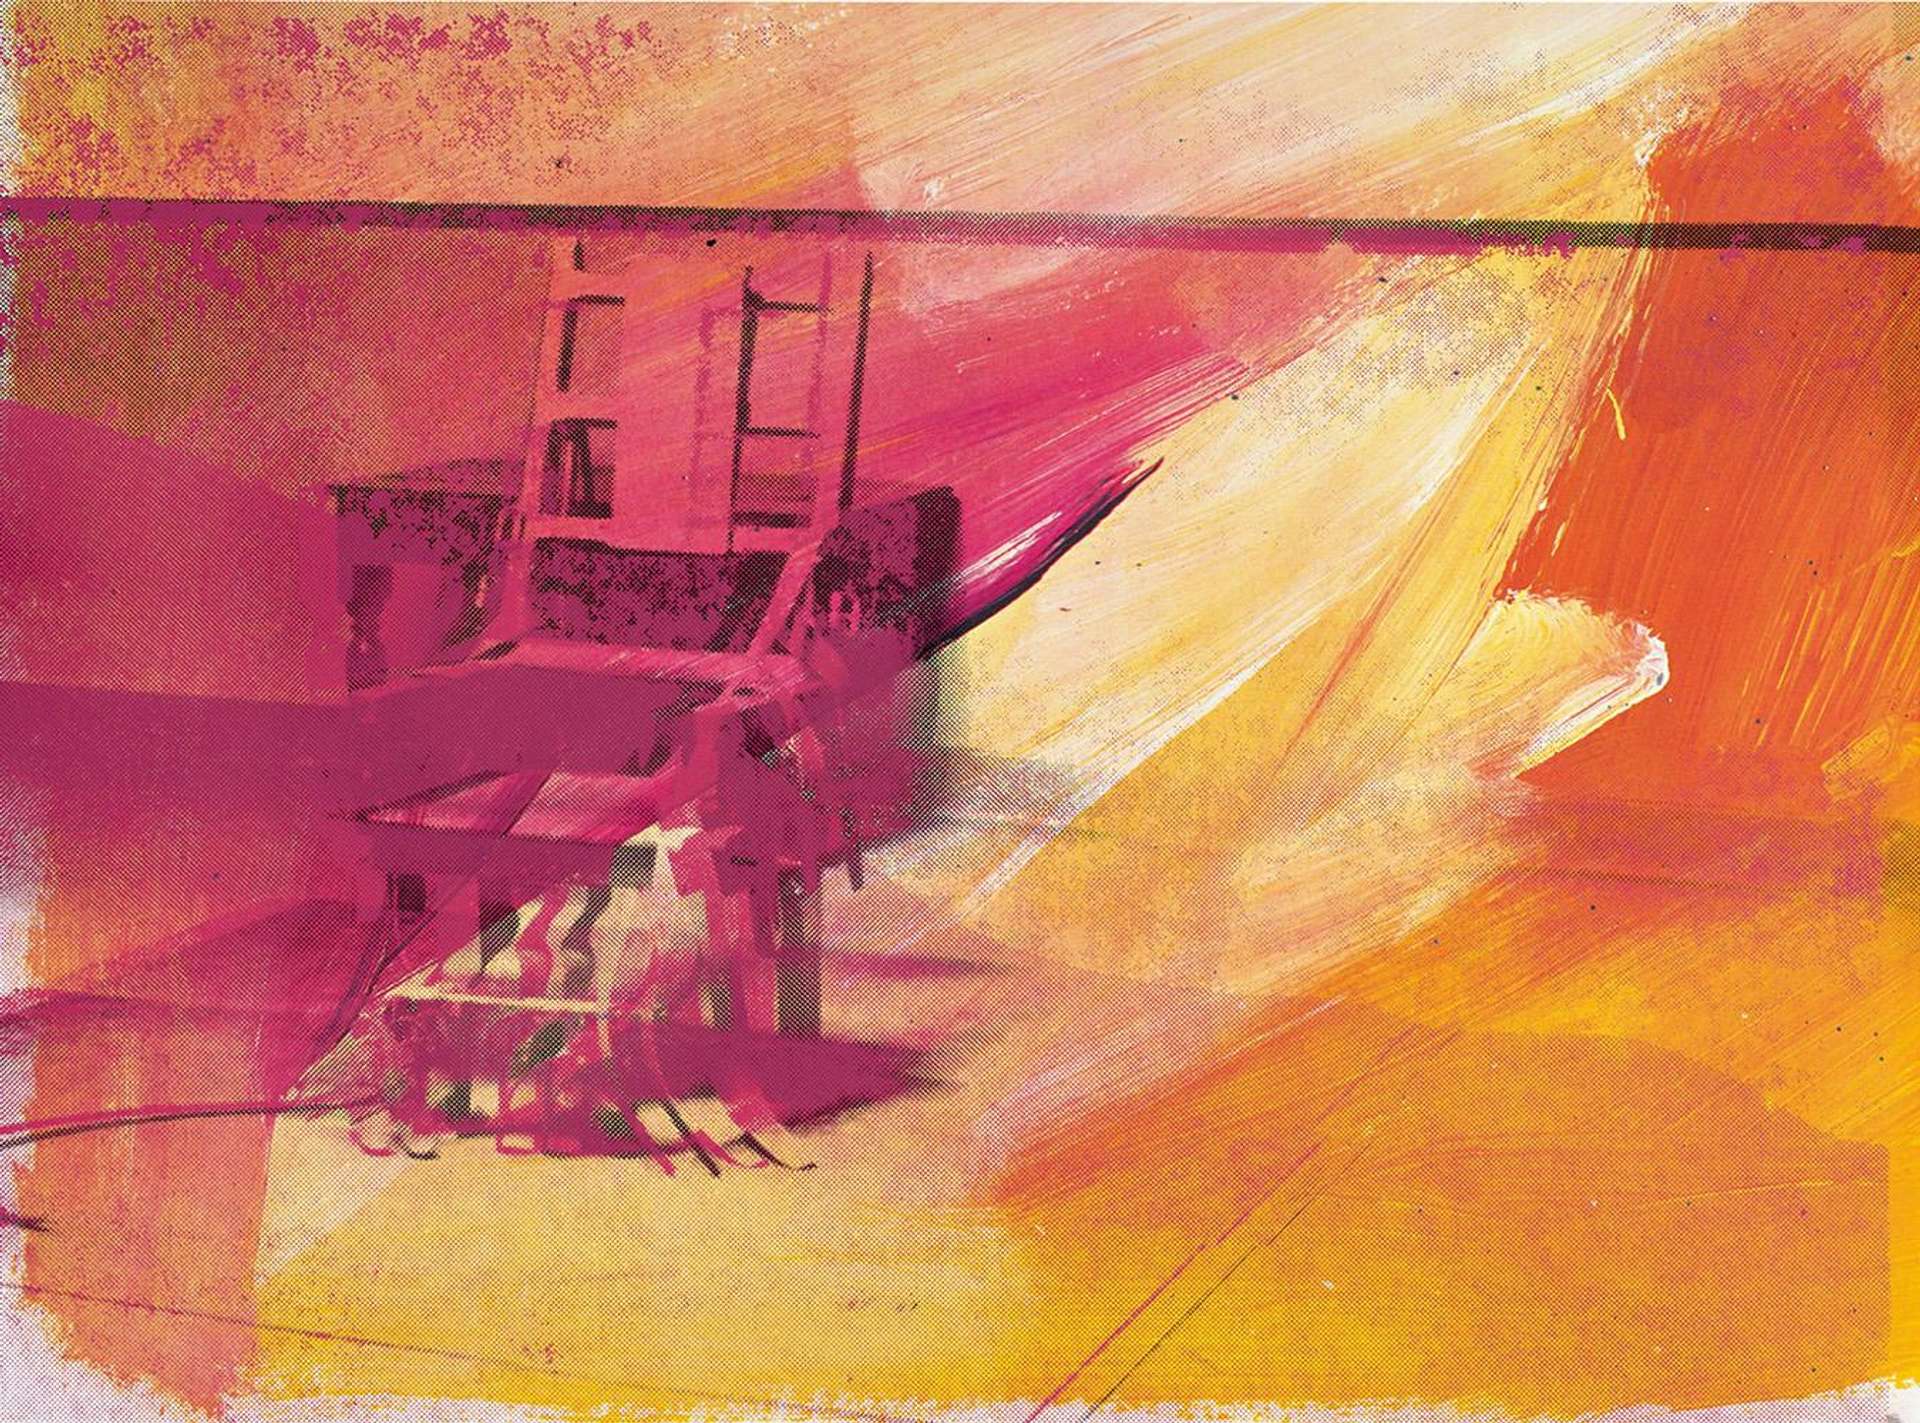 Electric Chair (F. & S. II.81) - Signed Print by Andy Warhol 1971 - MyArtBroker